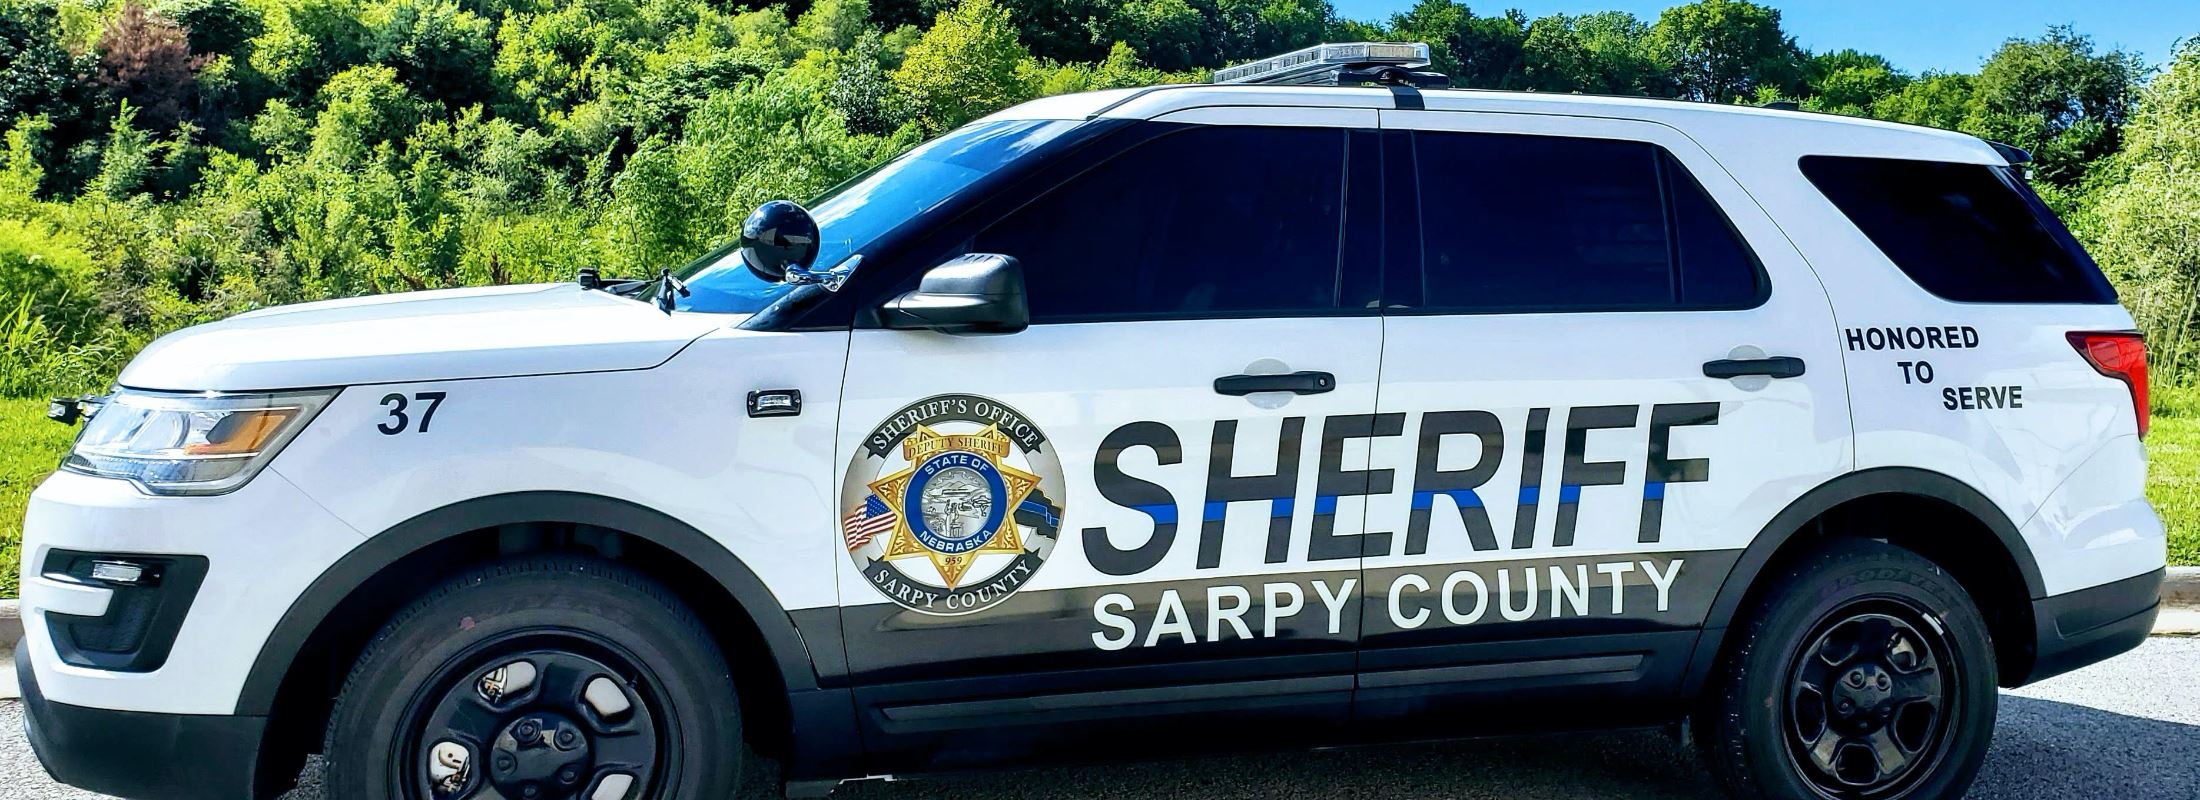 Sarpy County responds to road rage call arrest suspect RIVER COUNTRY